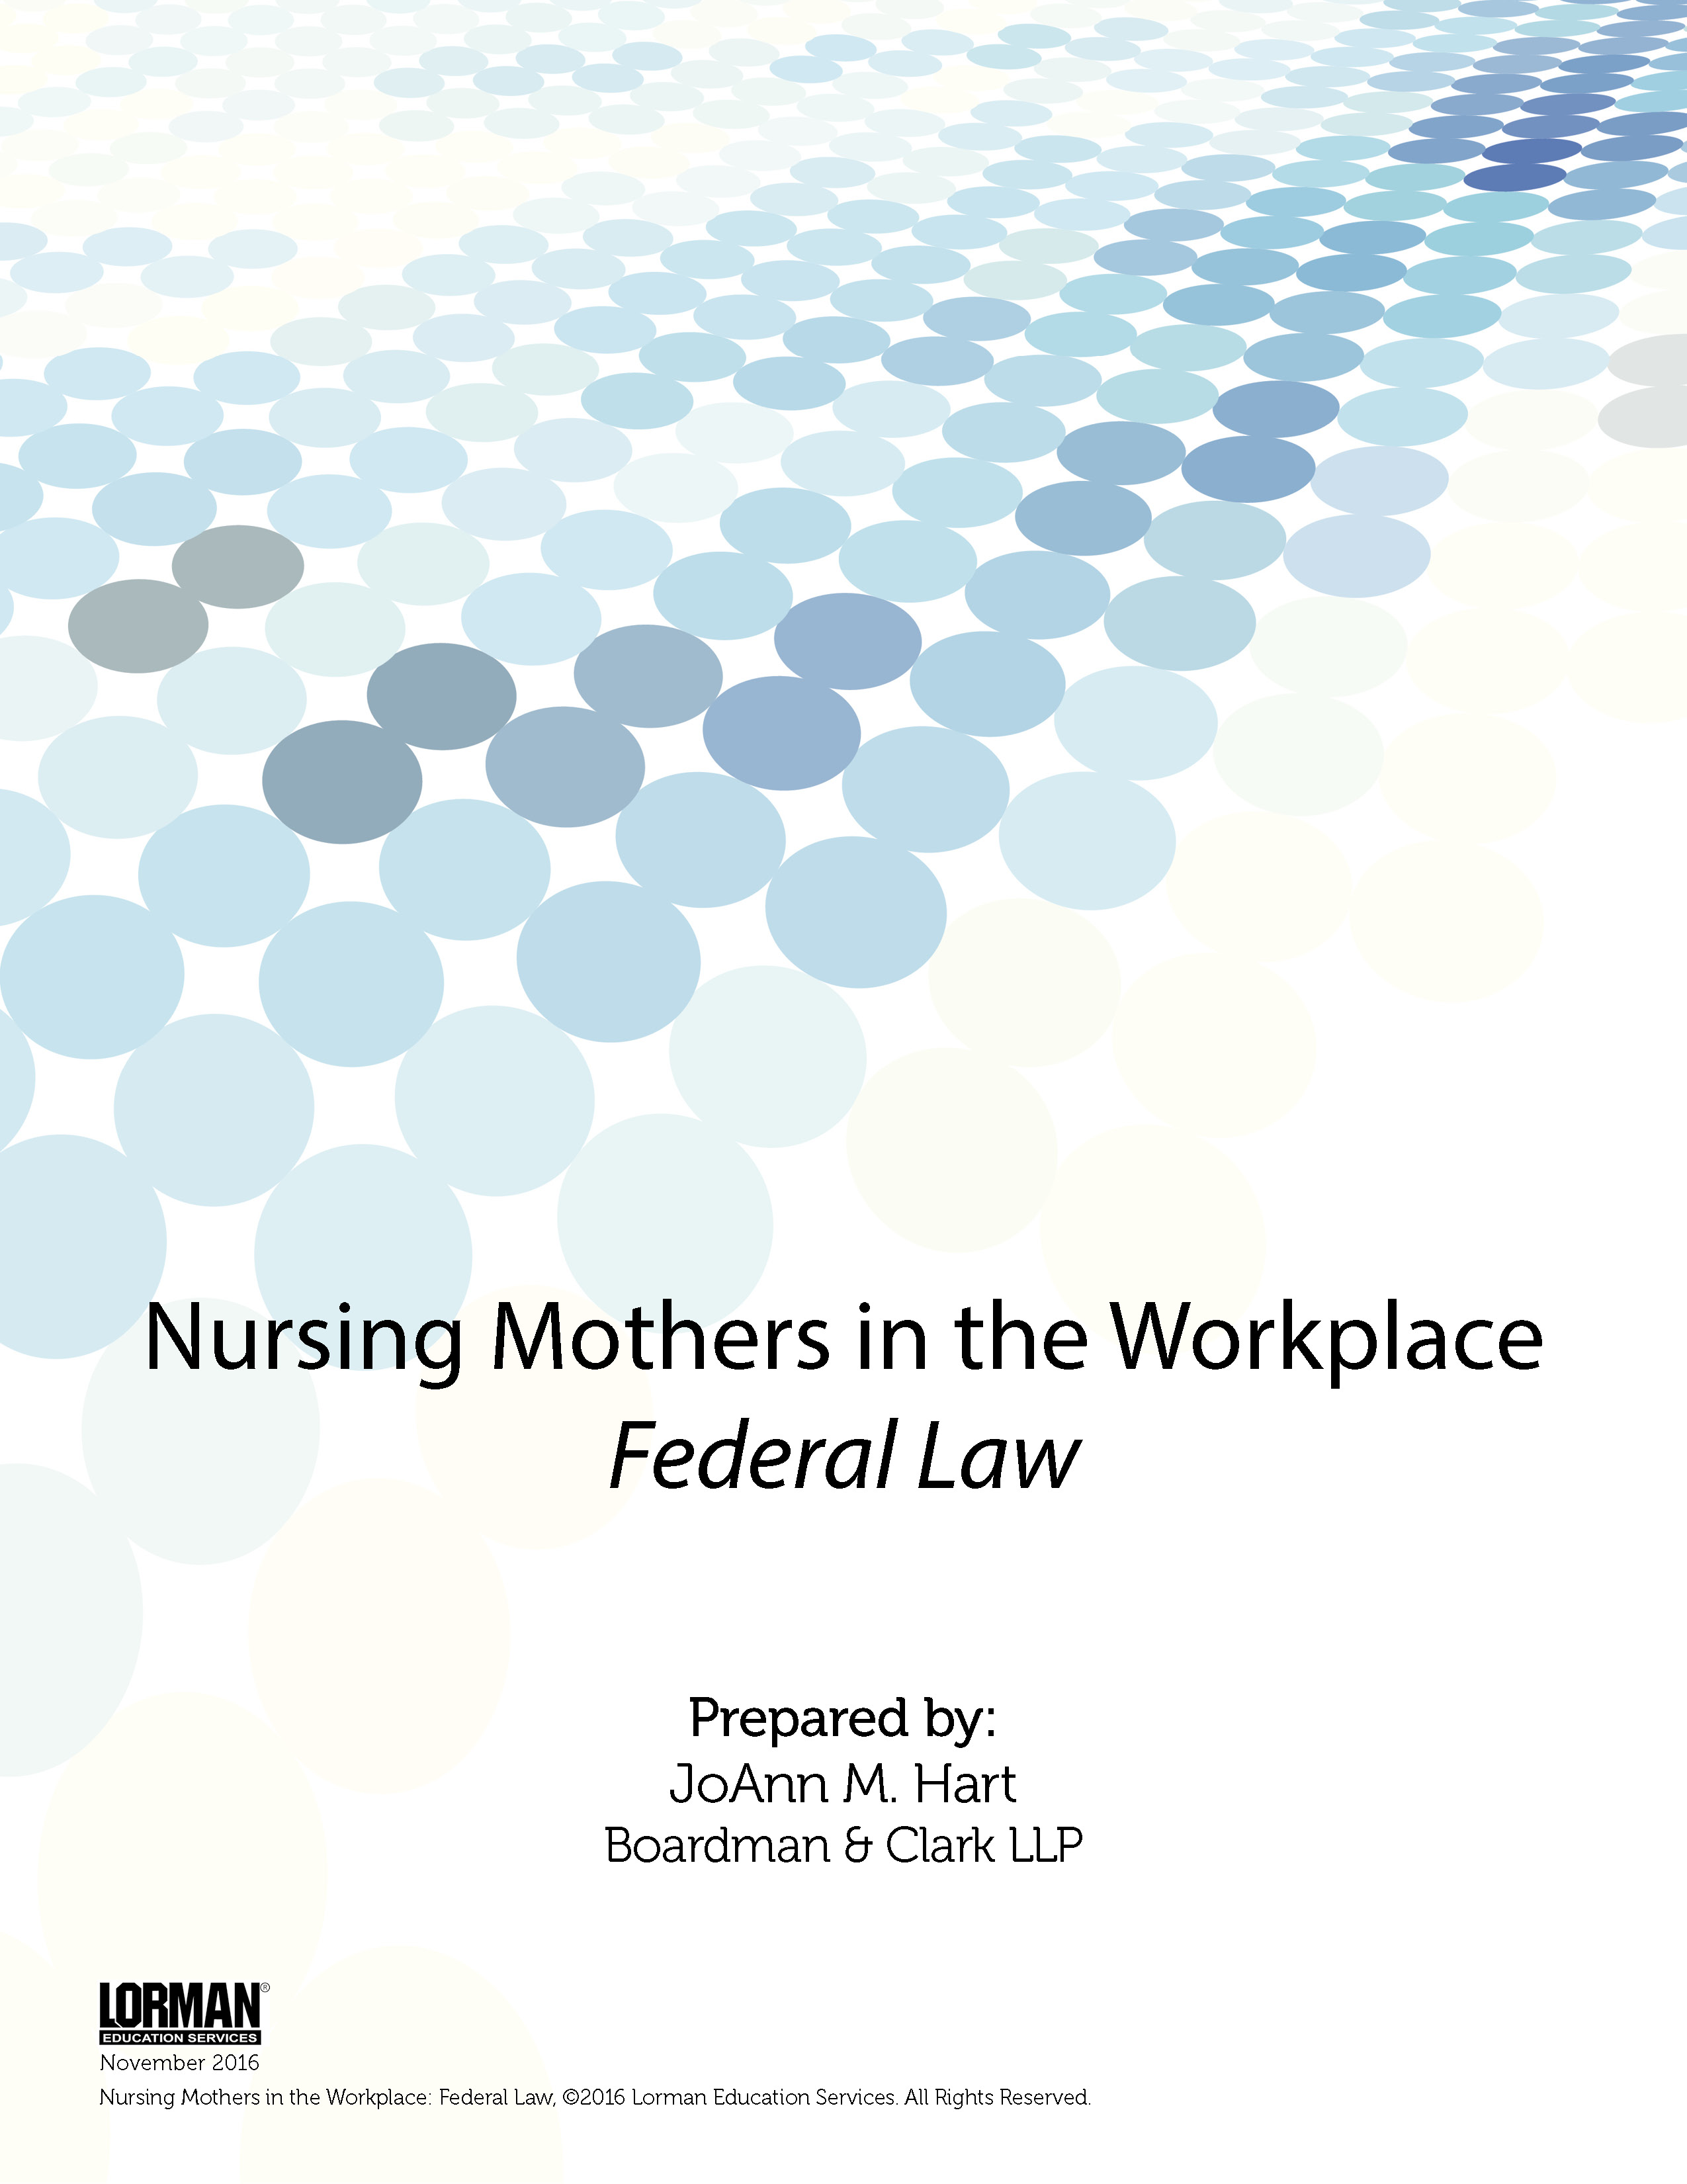 Nursing Mothers in the Workplace - Federal Law